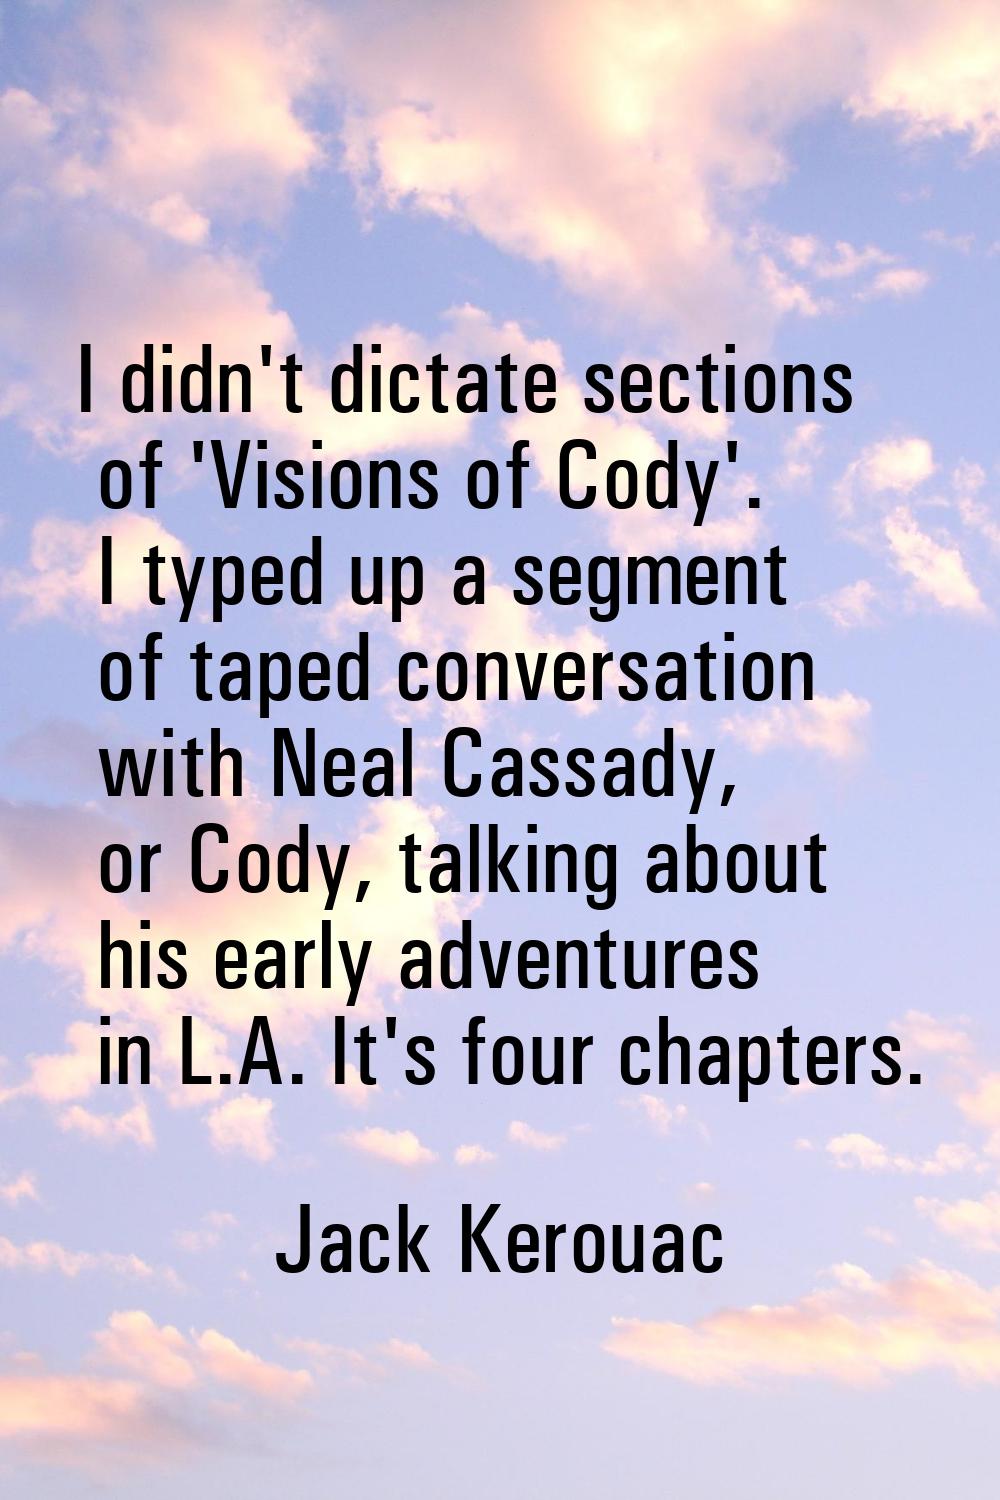 I didn't dictate sections of 'Visions of Cody'. I typed up a segment of taped conversation with Nea